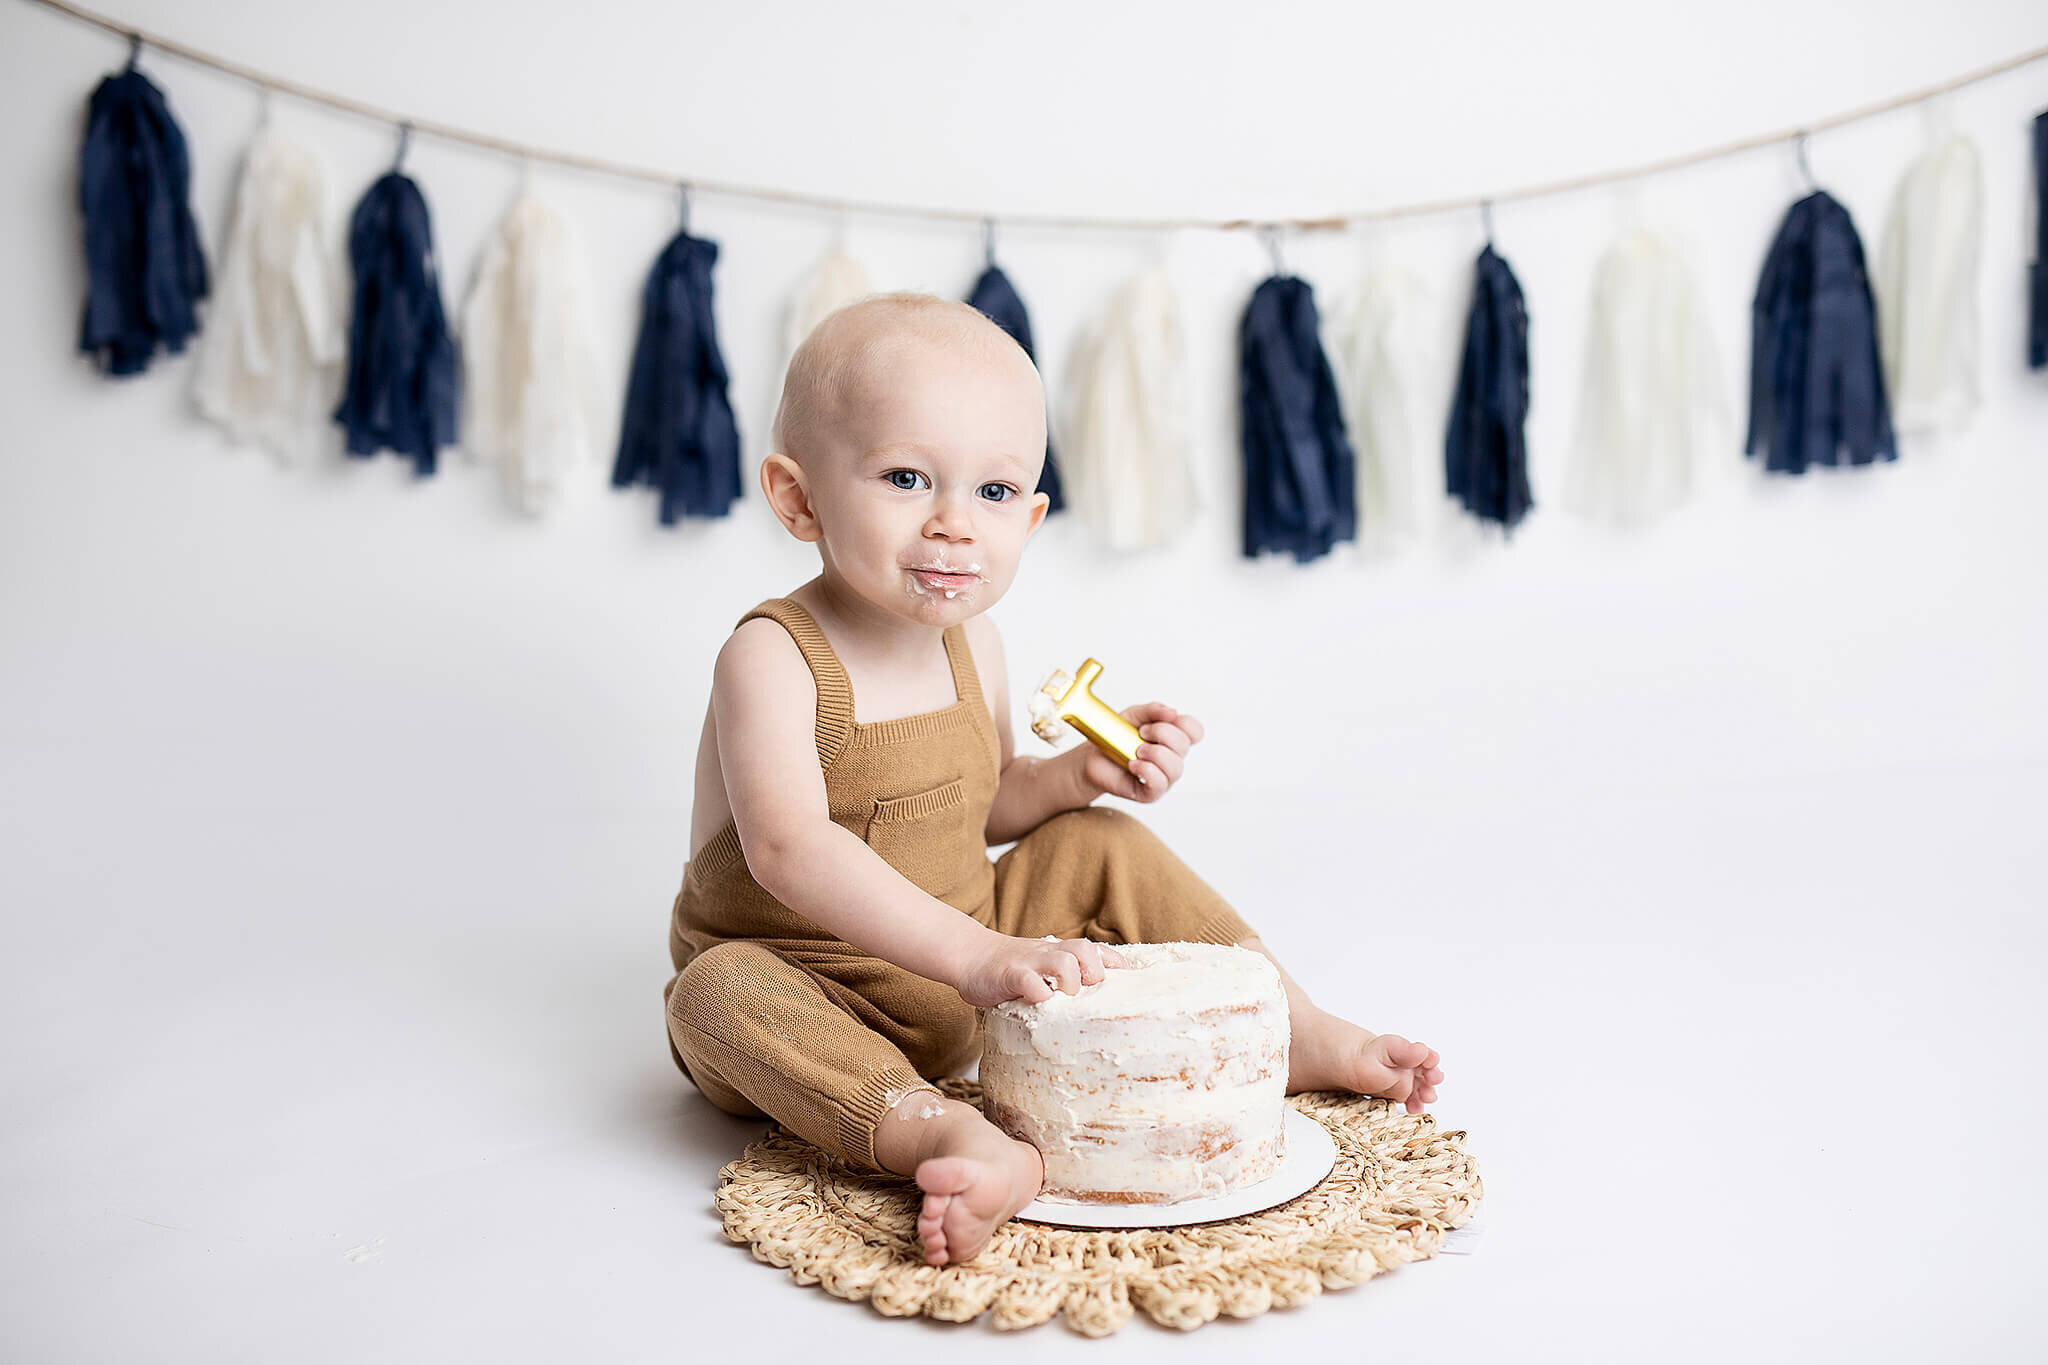 One year old boy with simple blue and white banner in the background